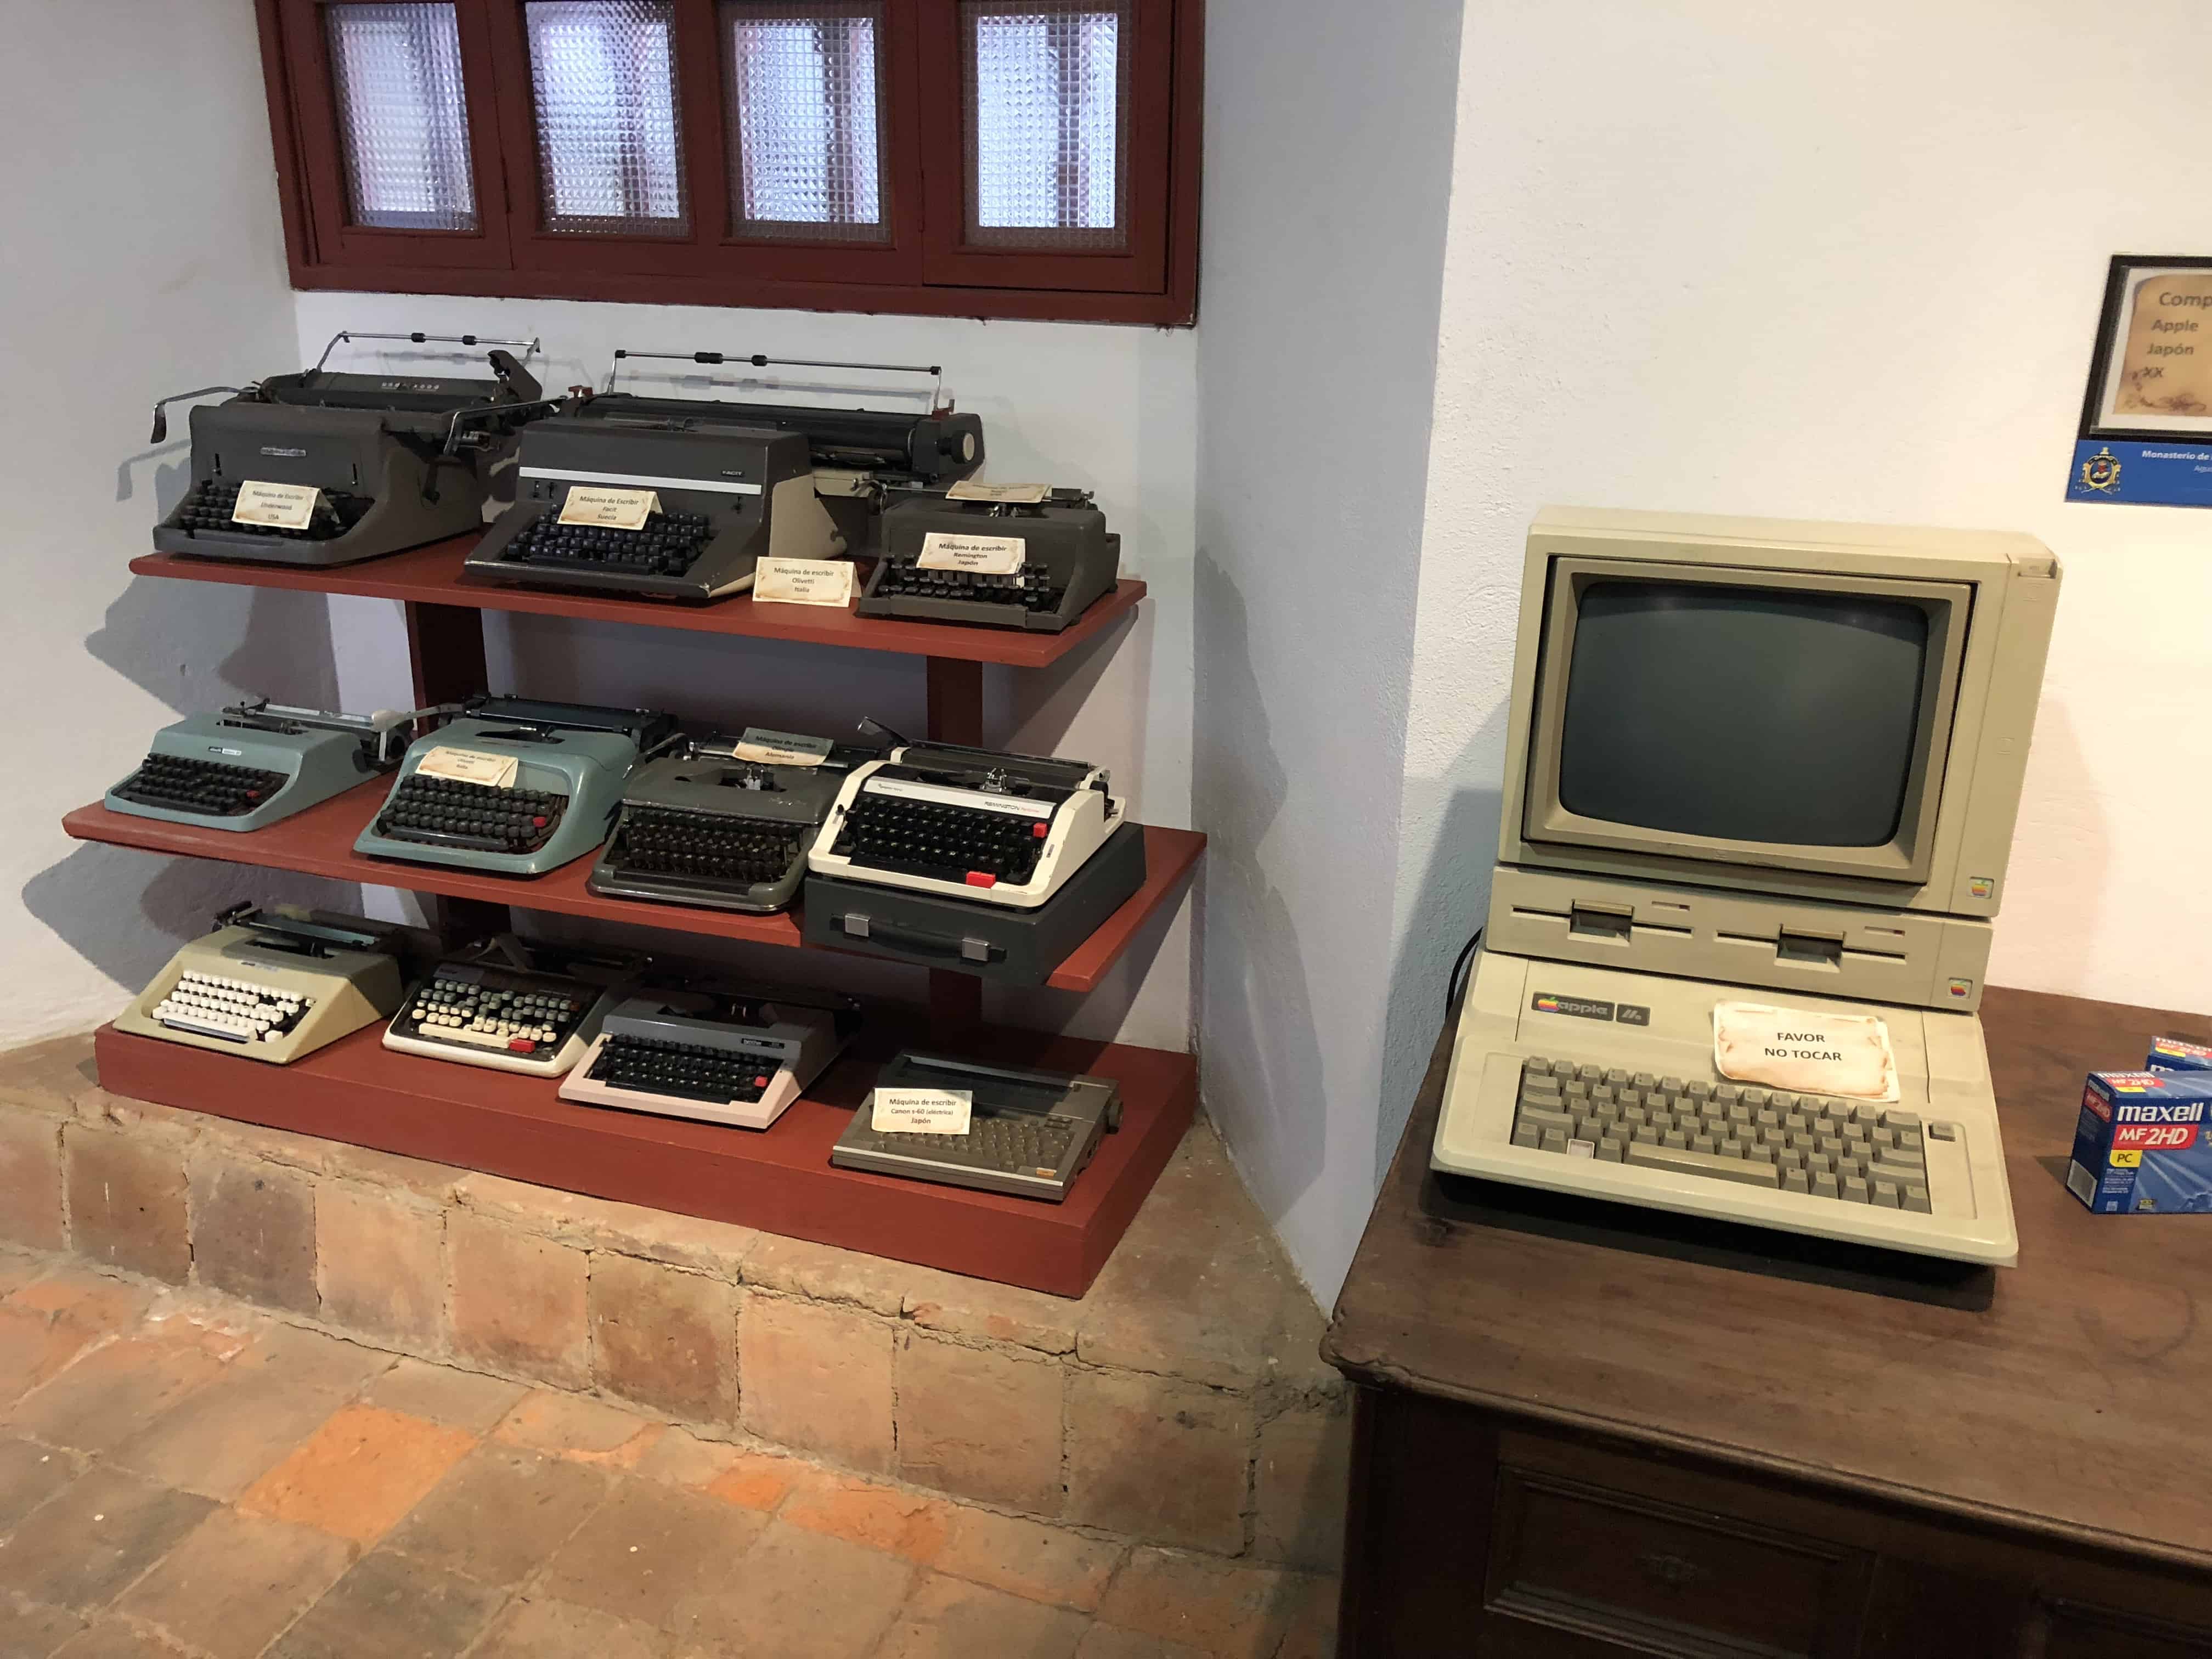 Old typewriters and an original Apple //e at La Candelaria Monastery, Boyacá, Colombia